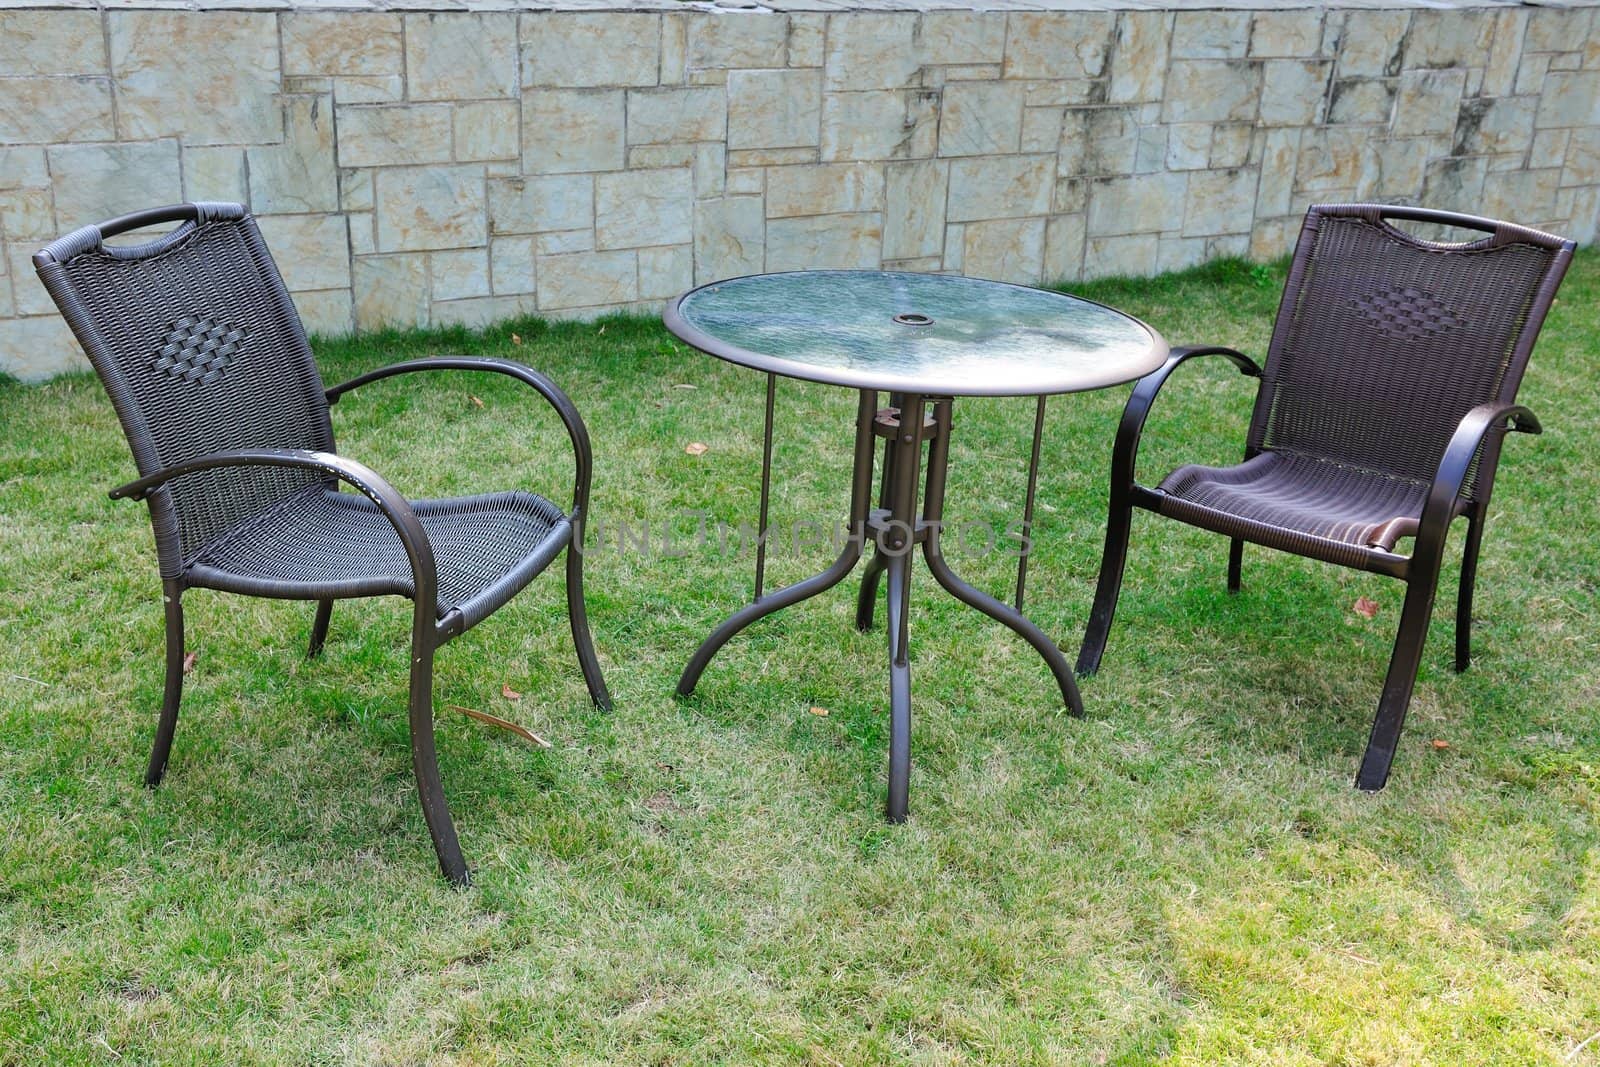 Table and chairs in the yard